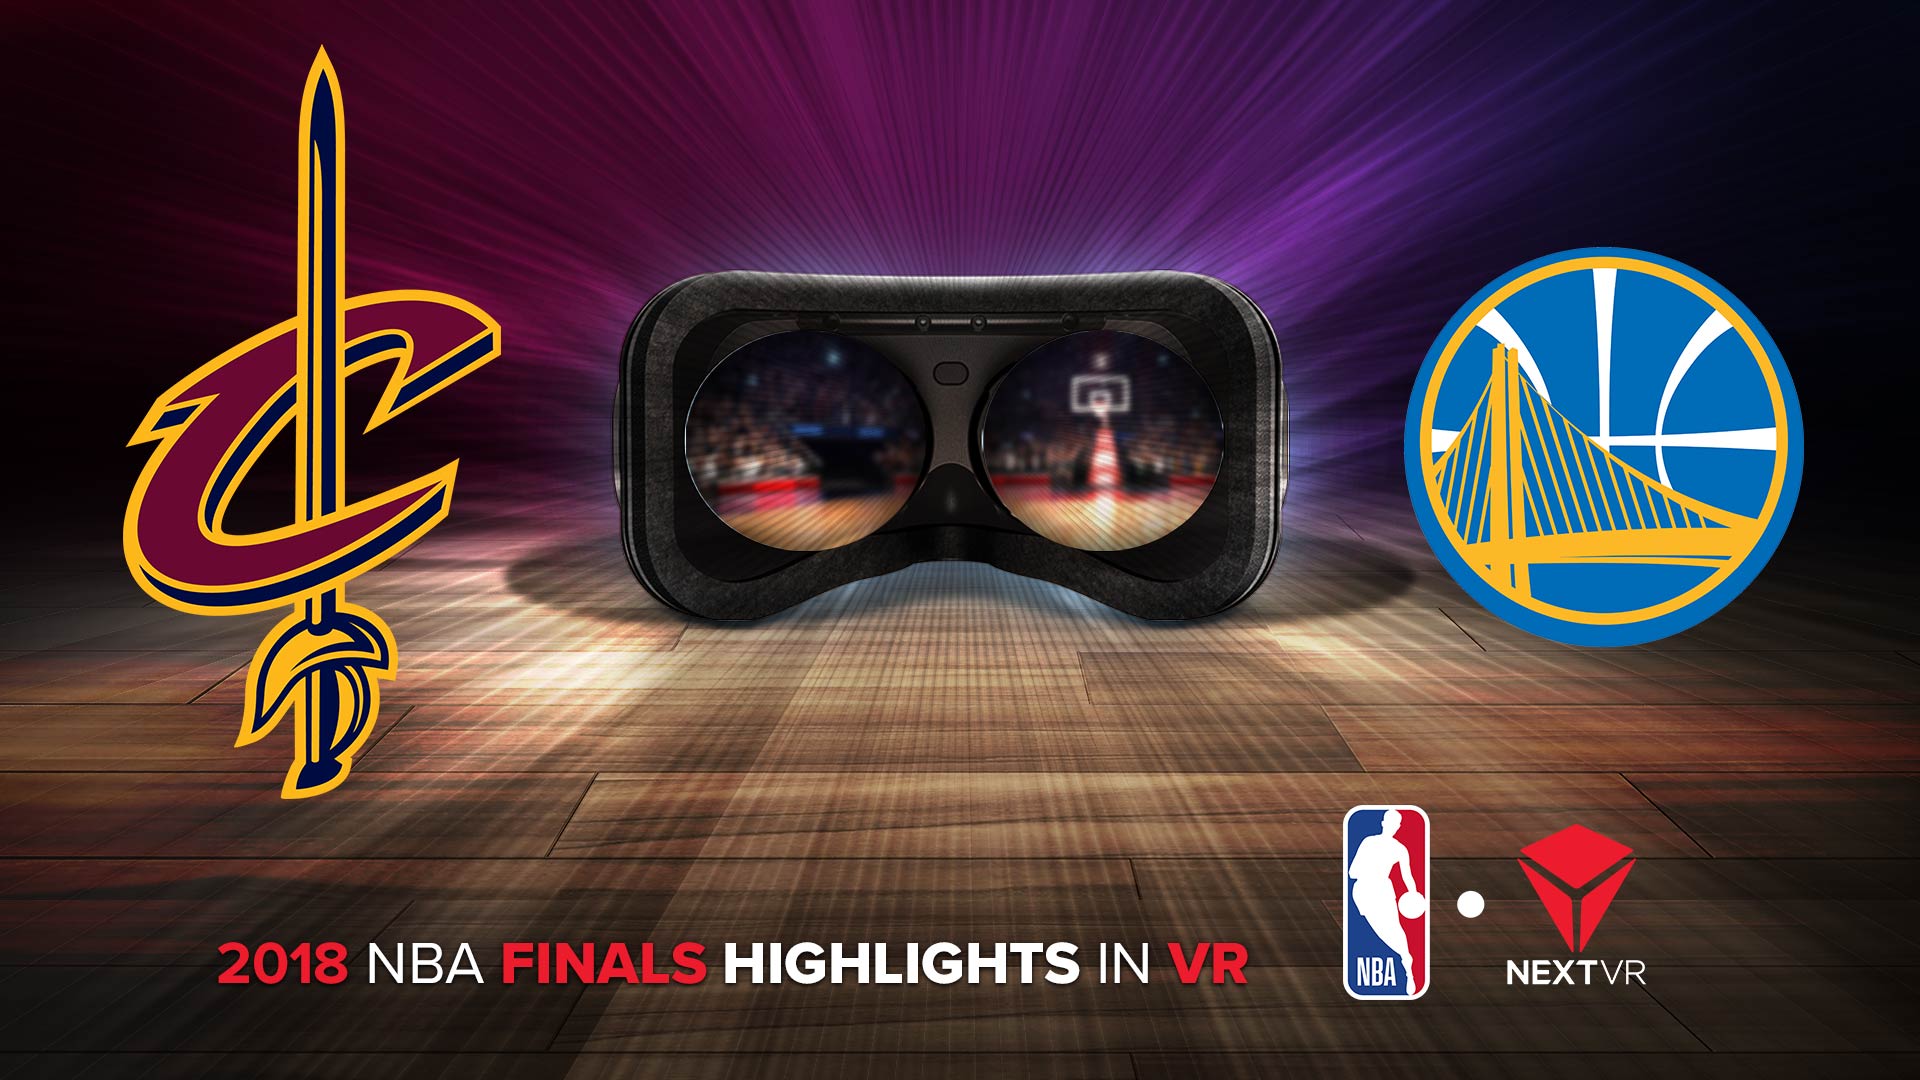 NextVR Debuts New High Resolution Video Format with NBA Finals Highlights Reels – to VR